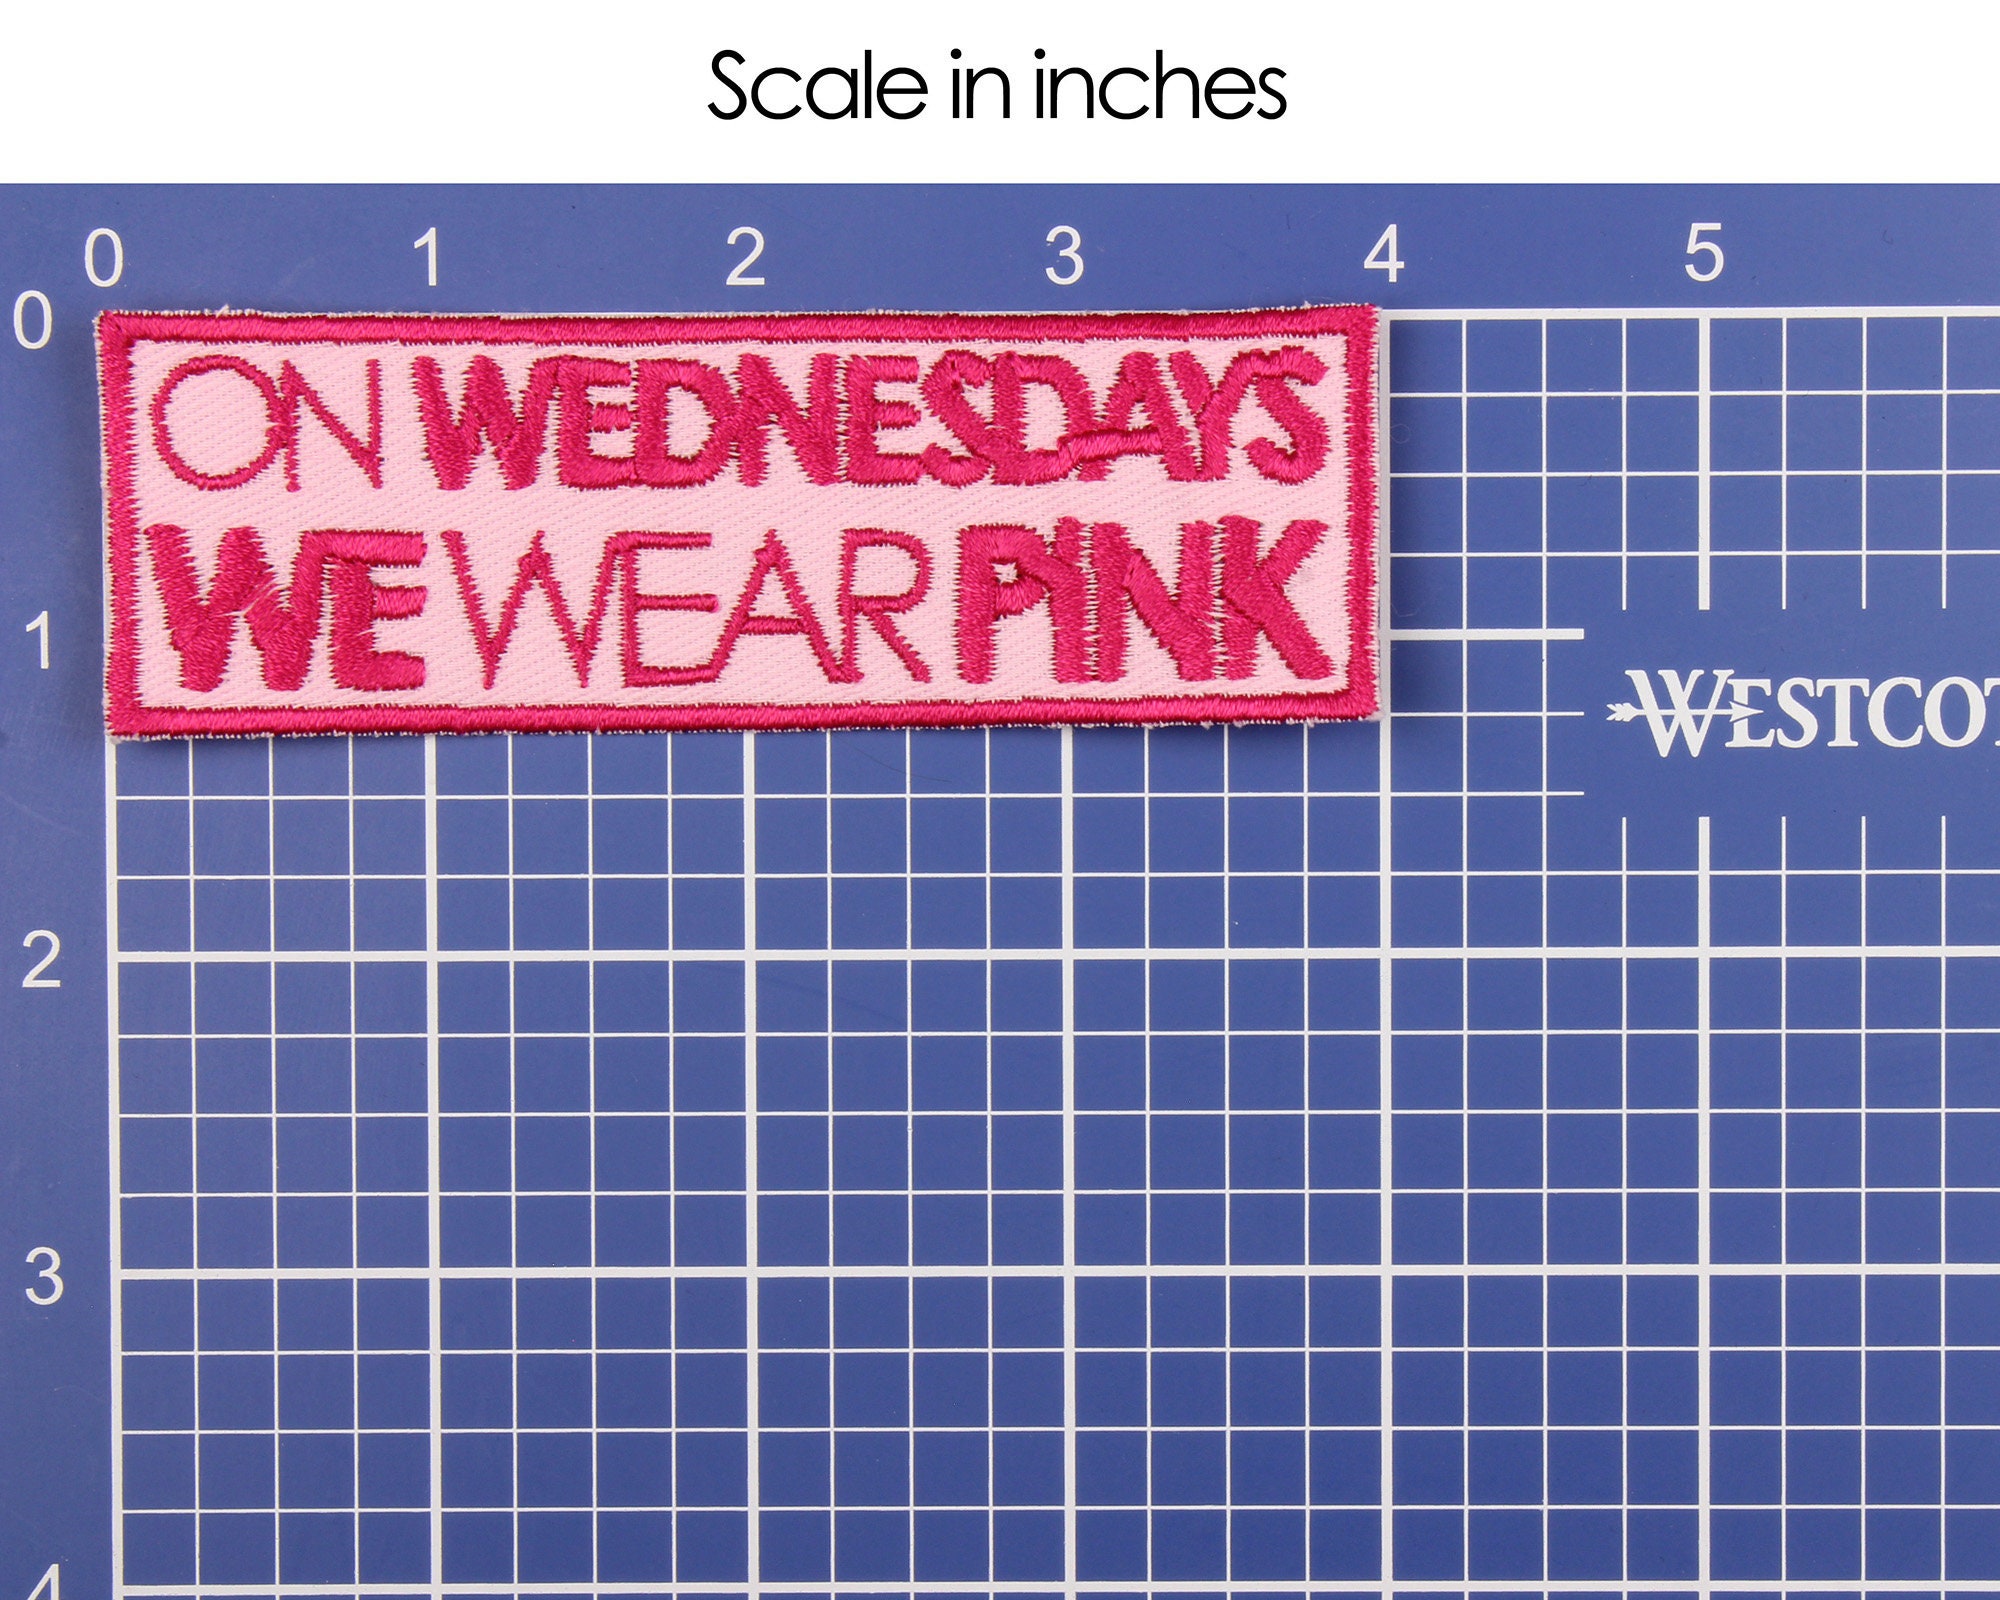 On Wednesdays We Wear Pink Embroidered Iron On Patch – Patch Collection